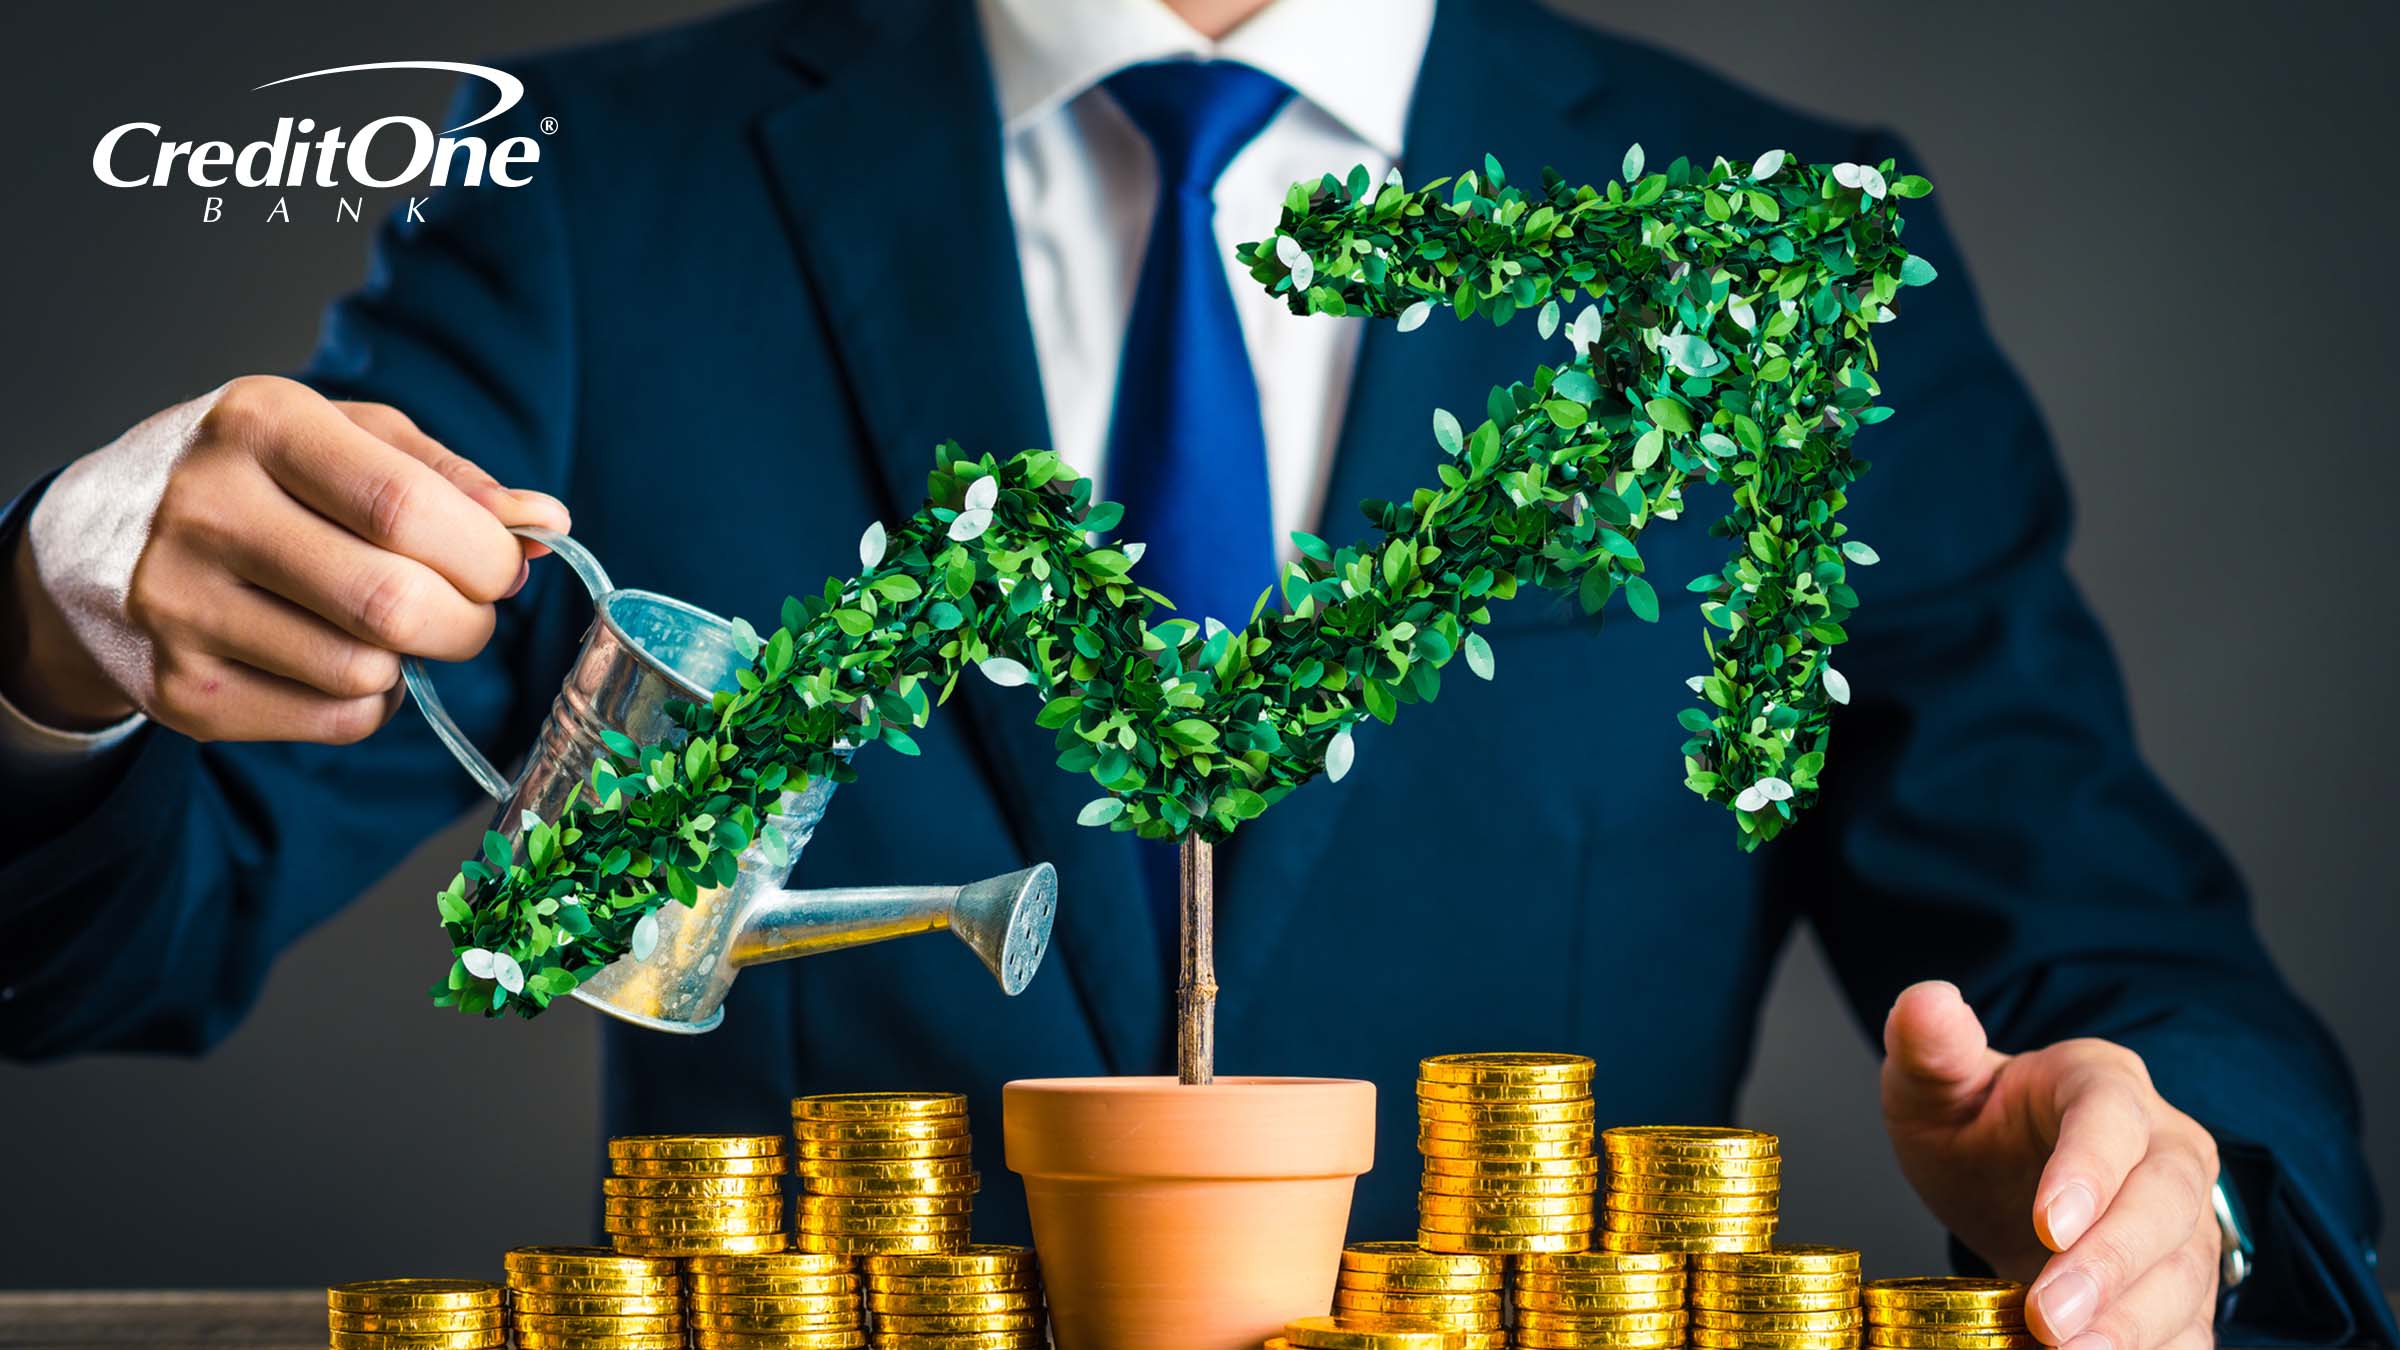 A businessman waters a plant shaped like an upward financial chart, surrounded by gold coins, to represent carefully tending to, preserving and growing his wealth.